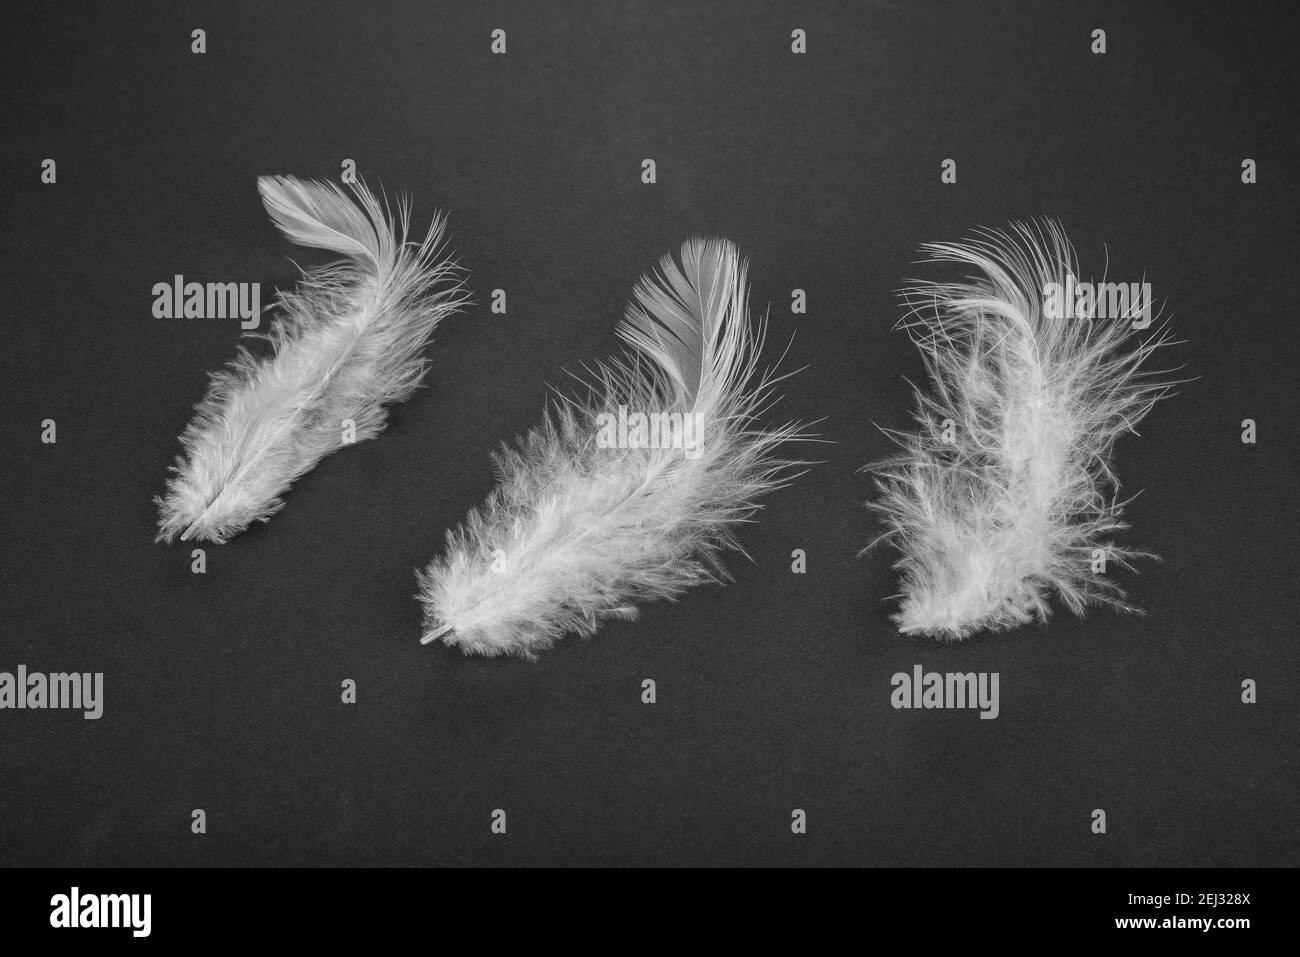 Feather from a bird on a black background Stock Photo